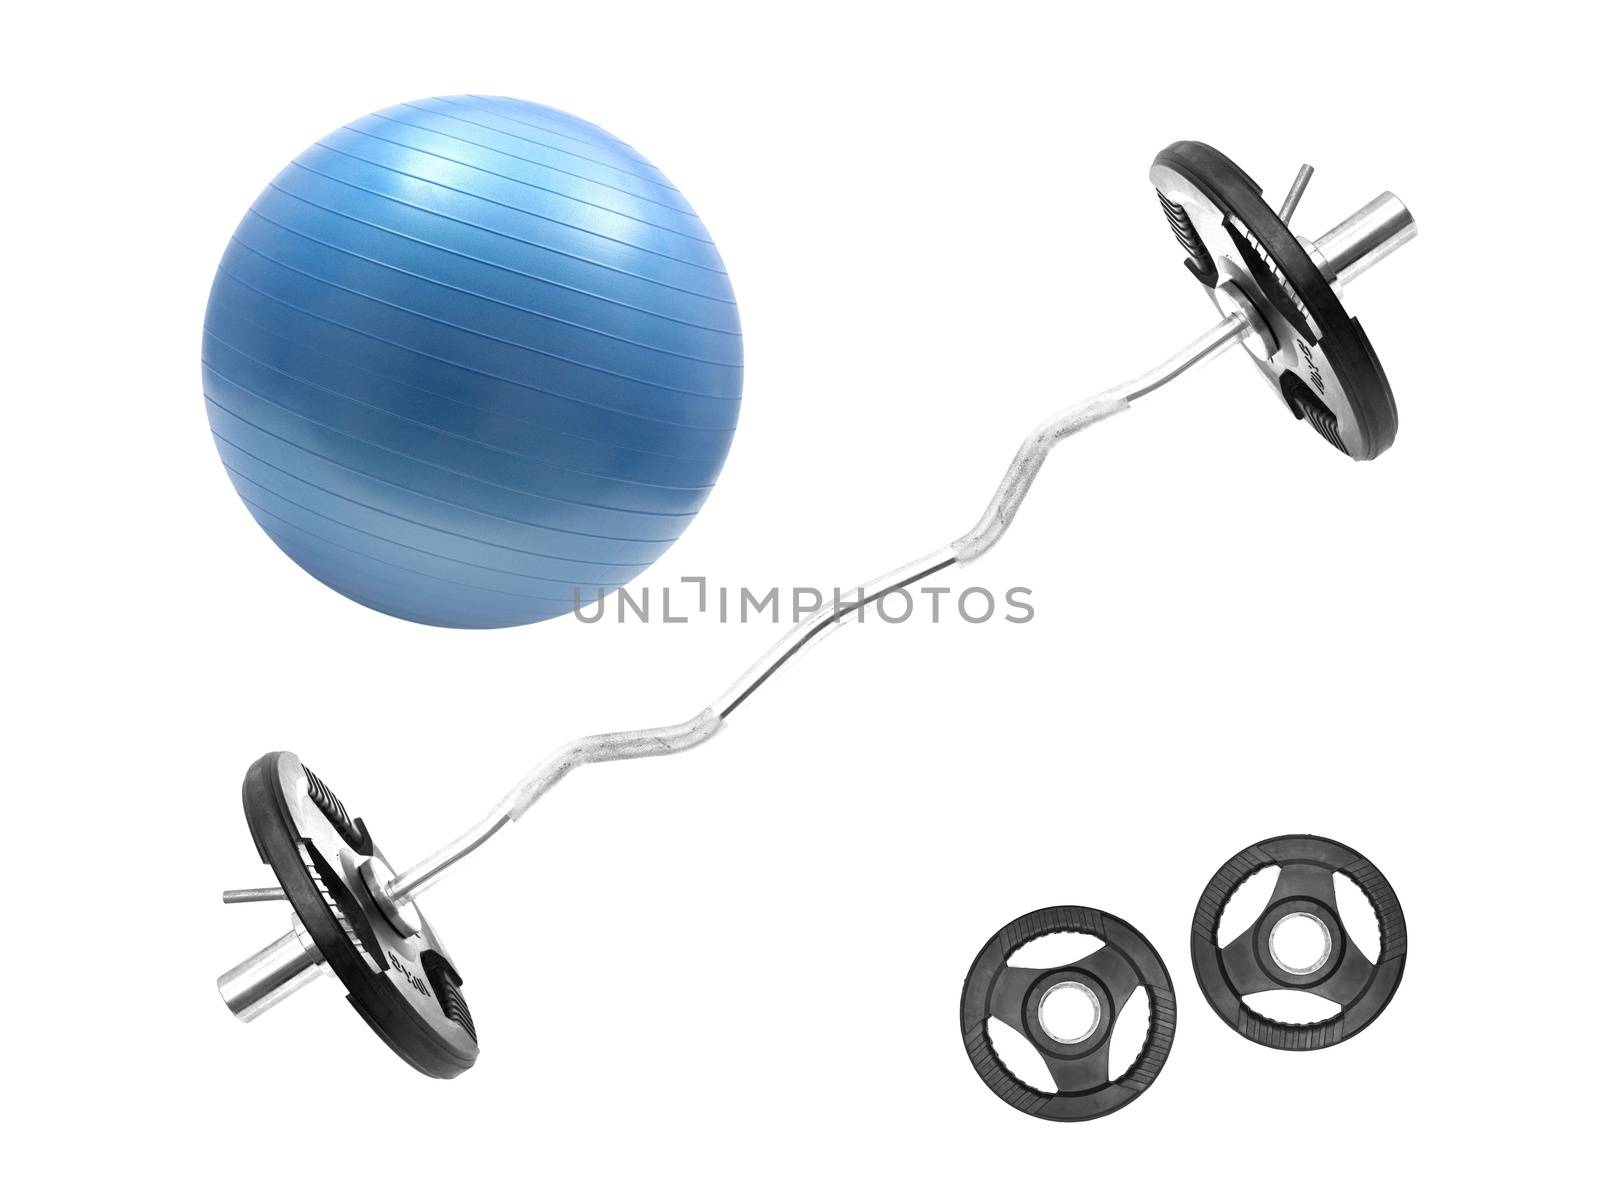 Exercise equipmwnt isolated against a white background